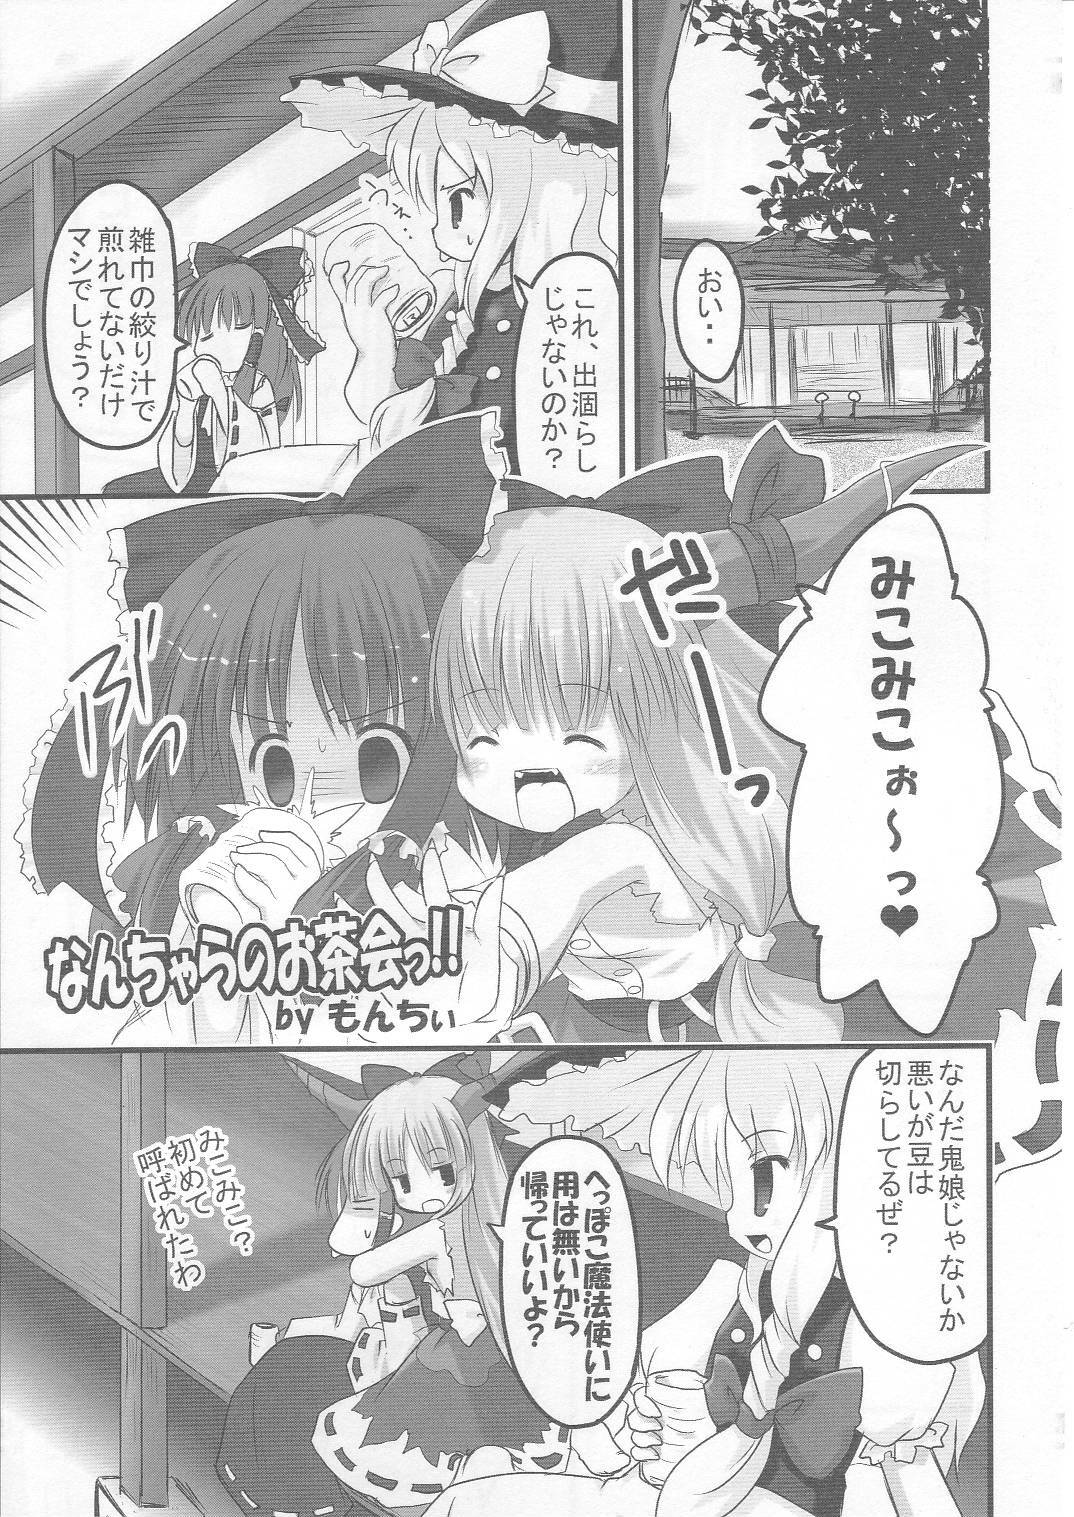 (SC30) [HappyBirthday (Maruchan., Monchy)] REDEMPTION (Touhou Project) page 20 full